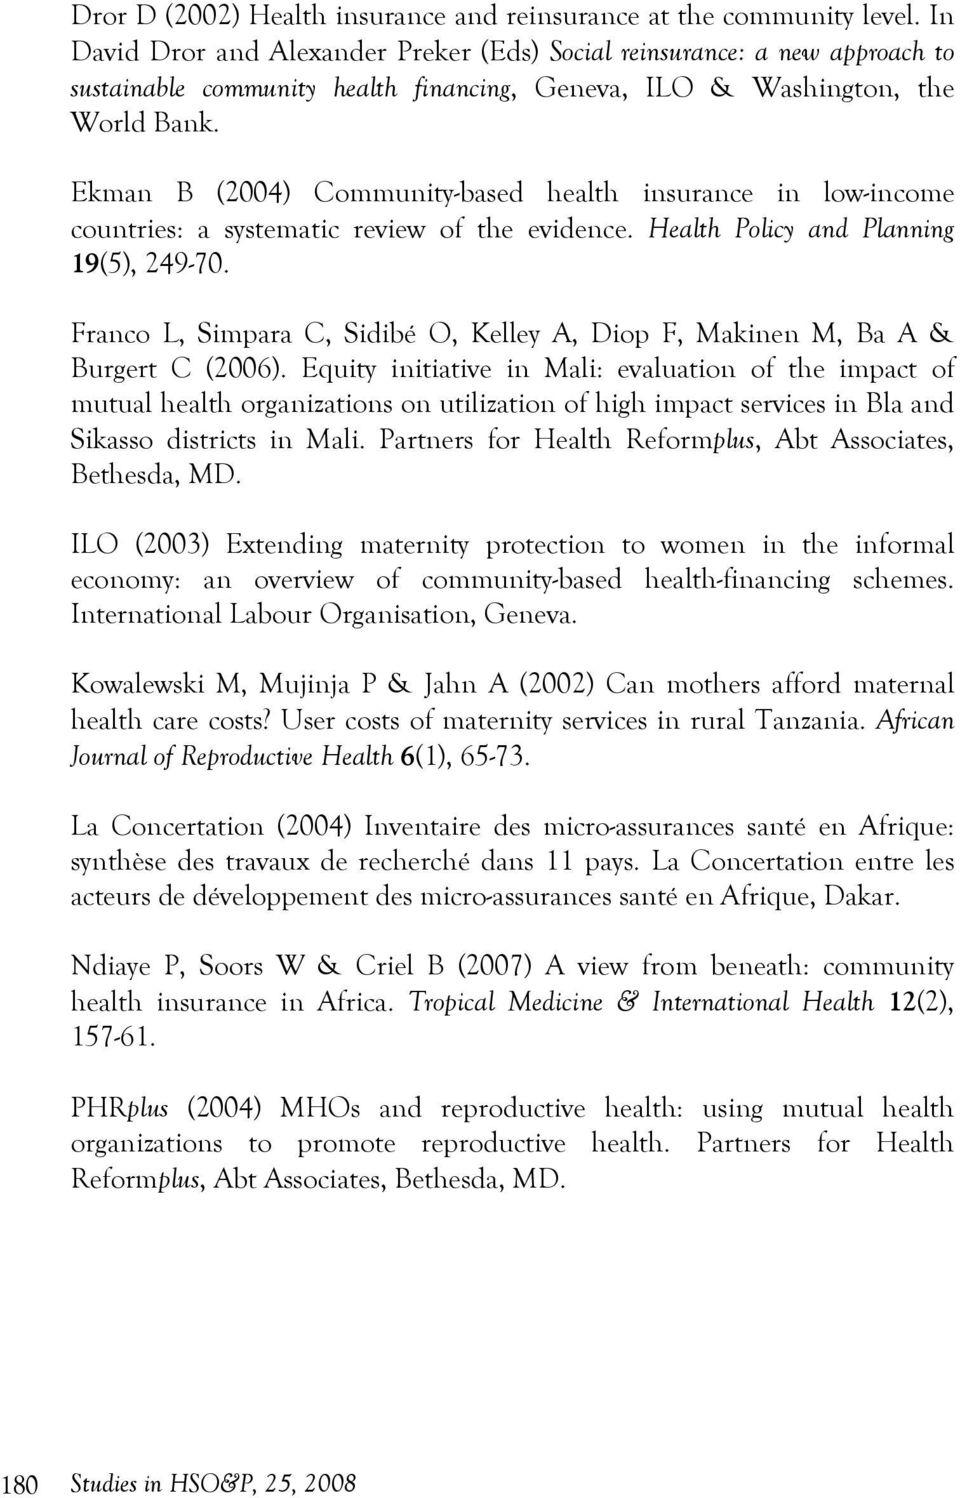 Ekman B (2004) Community-based health insurance in low-income countries: a systematic review of the evidence. Health Policy and Planning 19(5), 249-70.